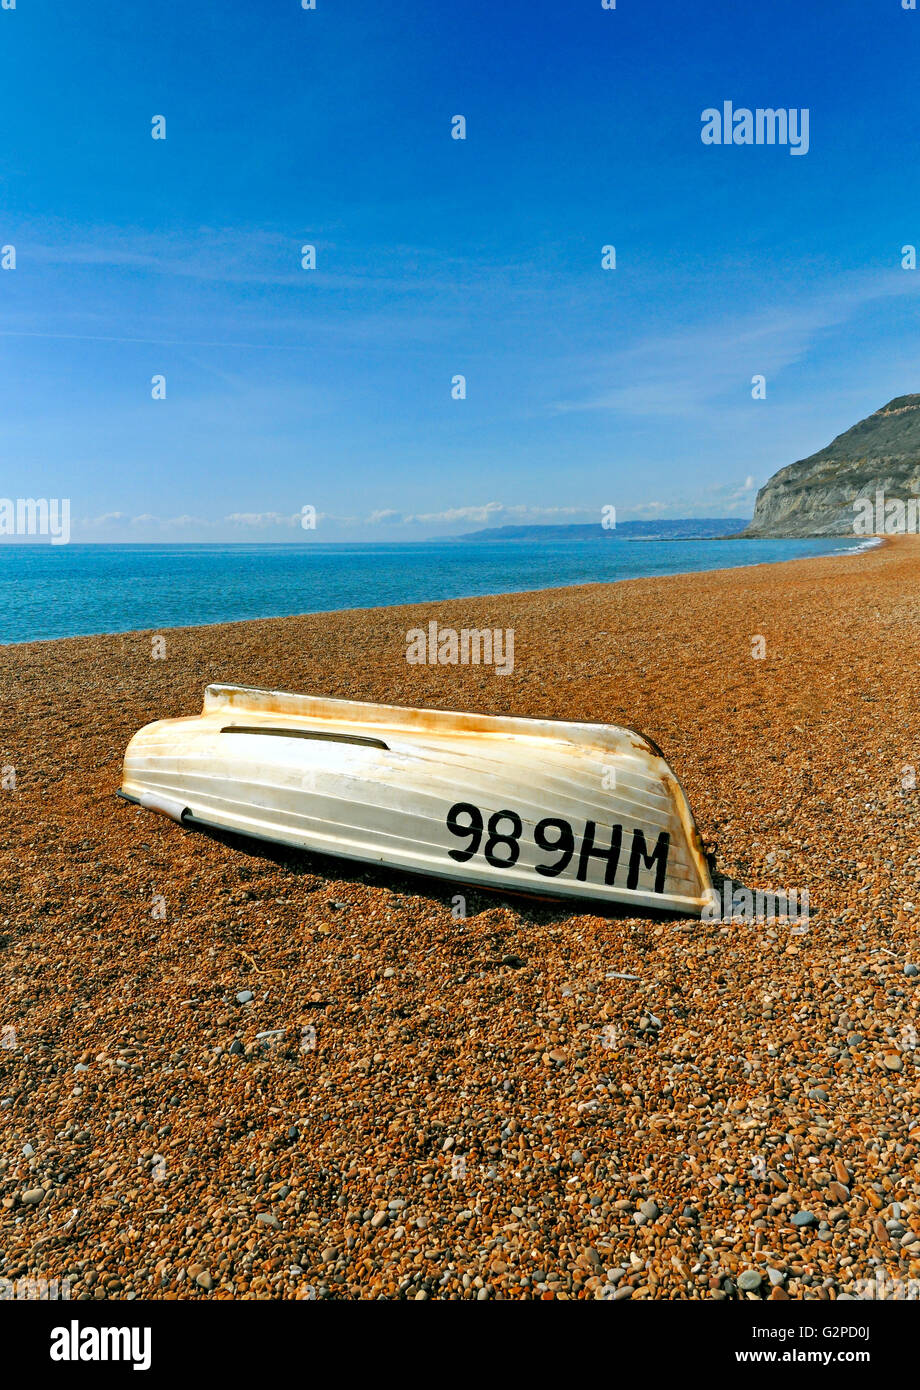 UPTURNED BOAT ON A SEA SHORE IN DORSET Golden Cap Stock Photo